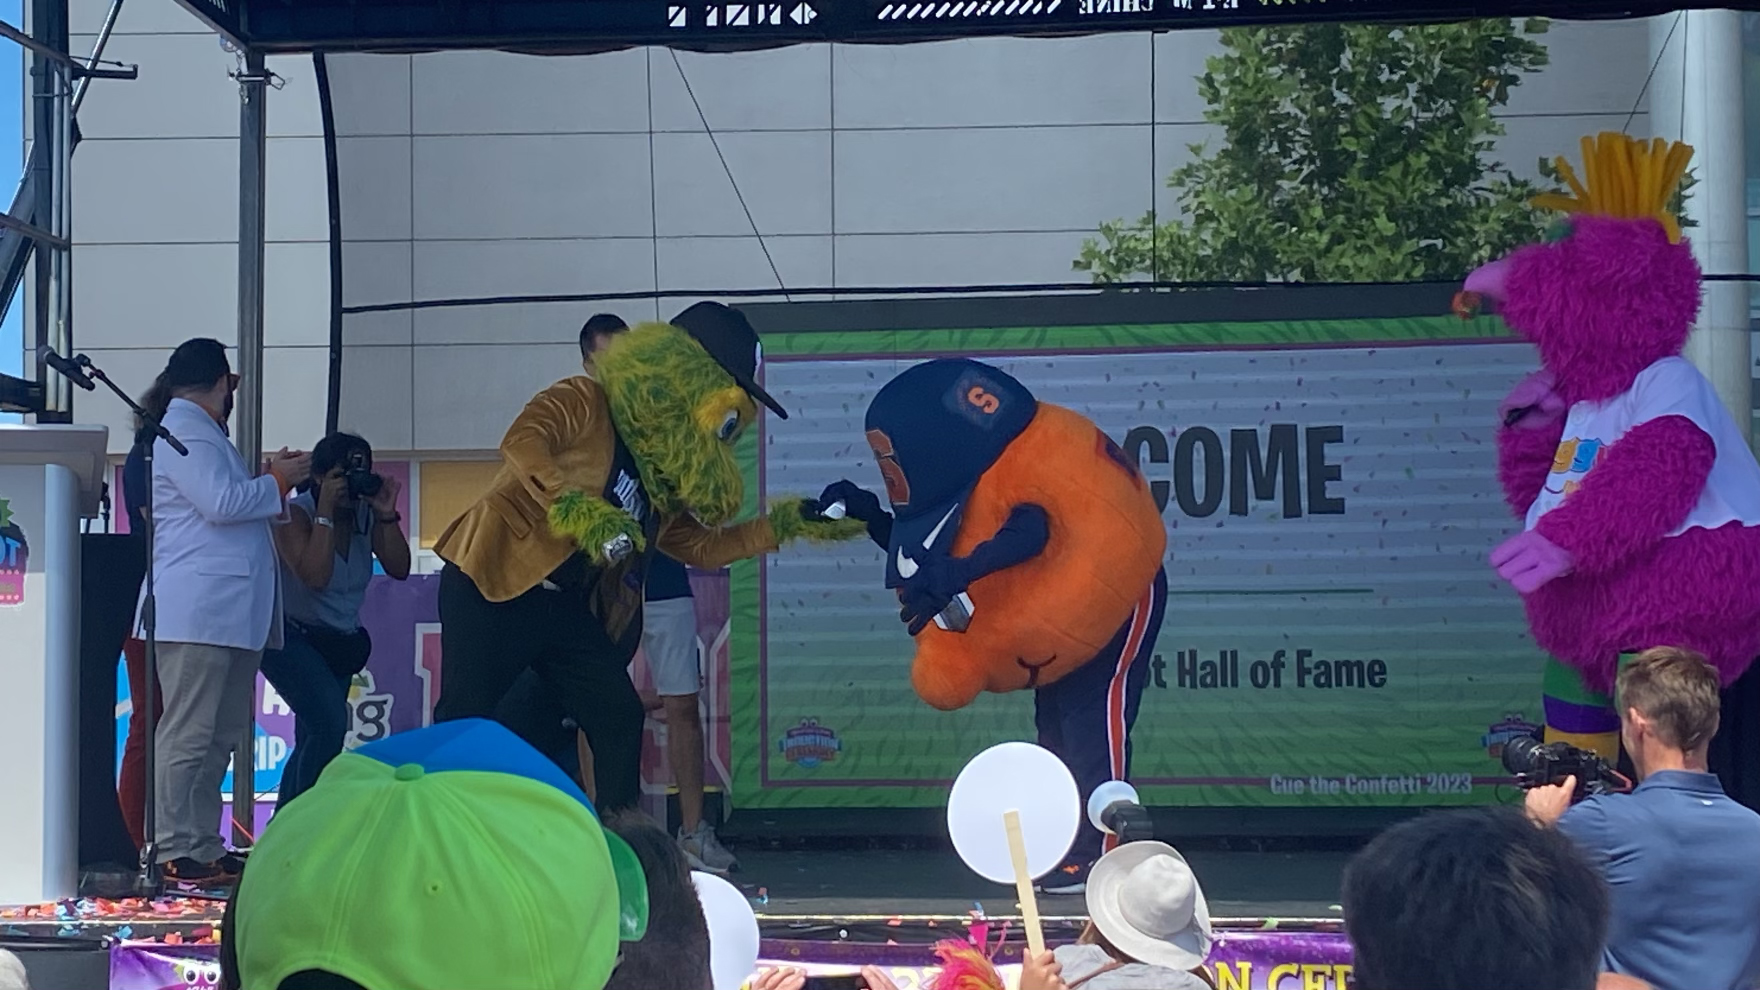 Otto the Orange being awarded their ring by another mascot. 